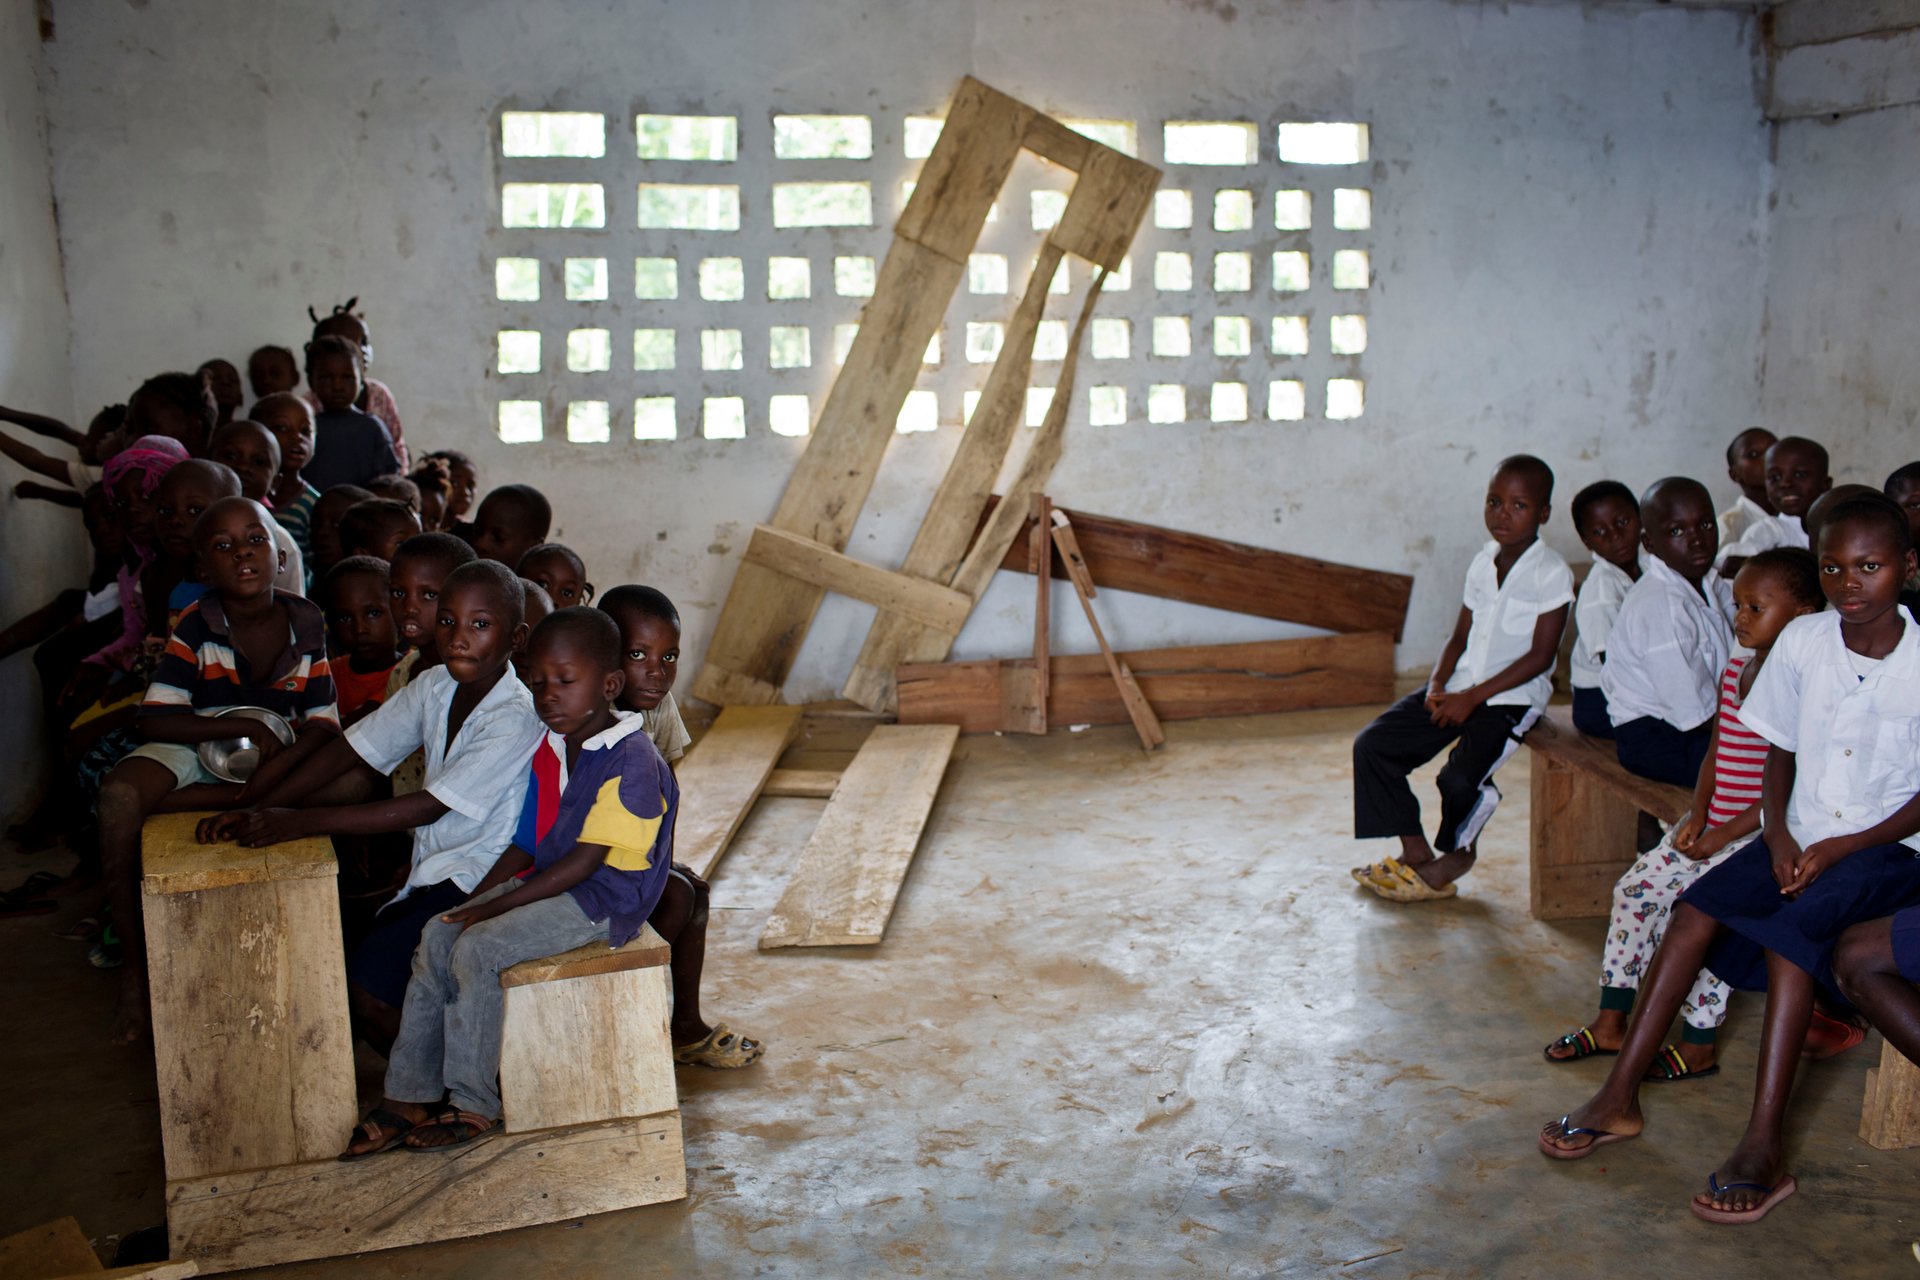 Liberia hopes that by bringing private companies into its education system it can end scenes like this at a Montserrado primary school where children are crammed on to classroom furniture. All photographs by Kate Holt 